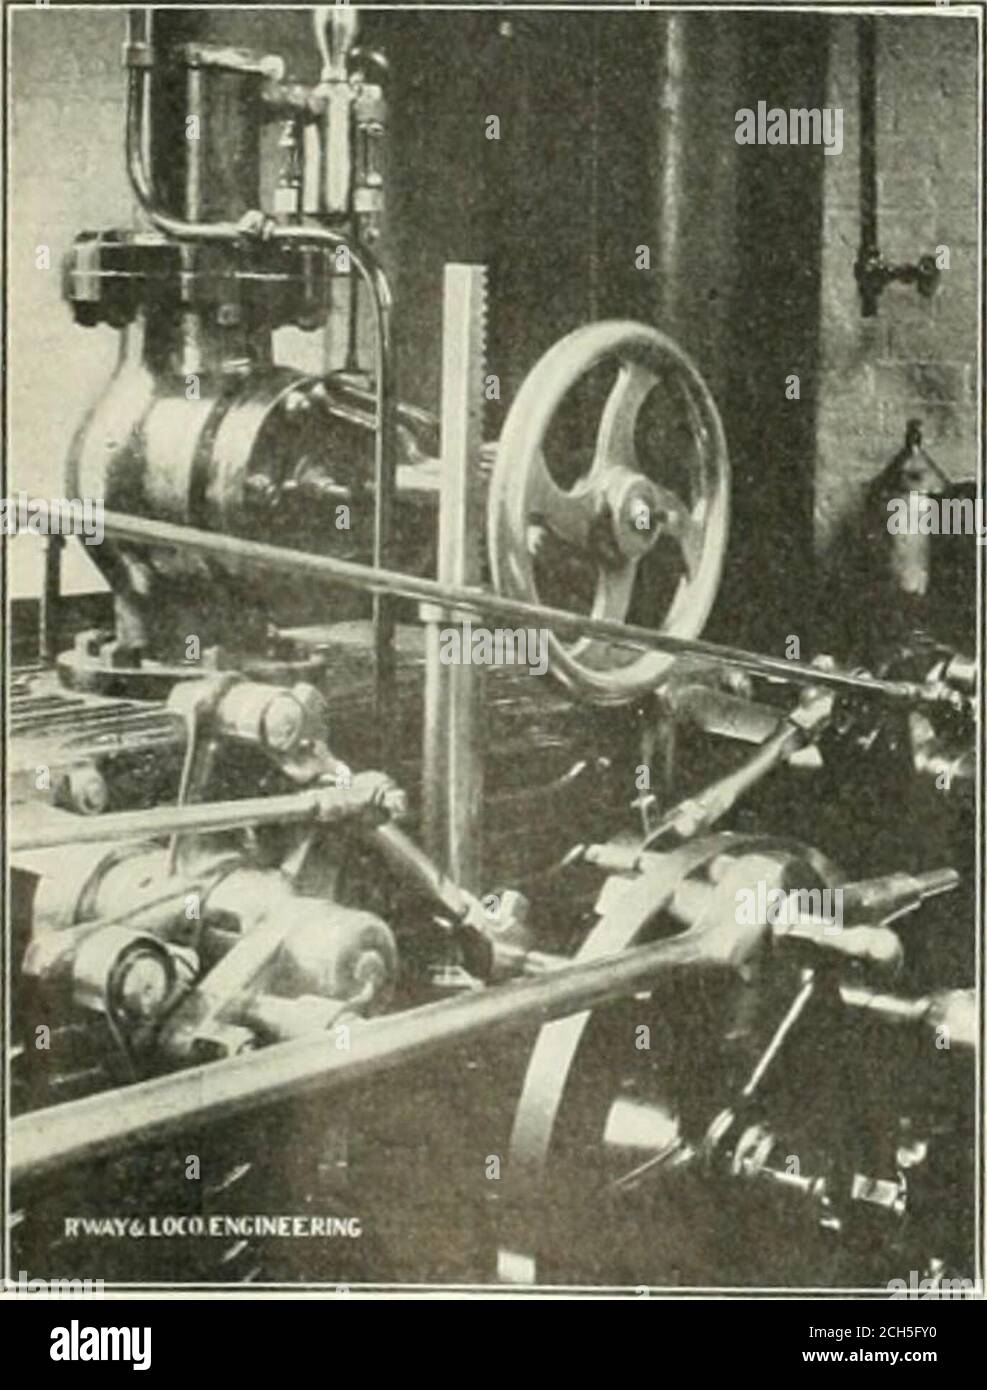 . Railway and locomotive engineering : a practical journal of railway motive power and rolling stock . THE WESTl.NGllOfSK AlK ISKAKE CuMfA.W S OIIICKS AND WORKS .T HA.MILTON, ONTARIO, CANADA. Fig. I shows an ingenious device at-tached to the throttle valve of a sta-tionary engine, for instantly stopping theengine in case of danger to life or ma-chinery. A cylinder l54-in. diameter byi2-in. long is placed below and at oneside of the throttle valve stem. The tophead of this cylinder has a square hole,through which passes a i-in. square pis-ton rod, having teeth cut on the side. FIG. 1. THROTTLE Stock Photo